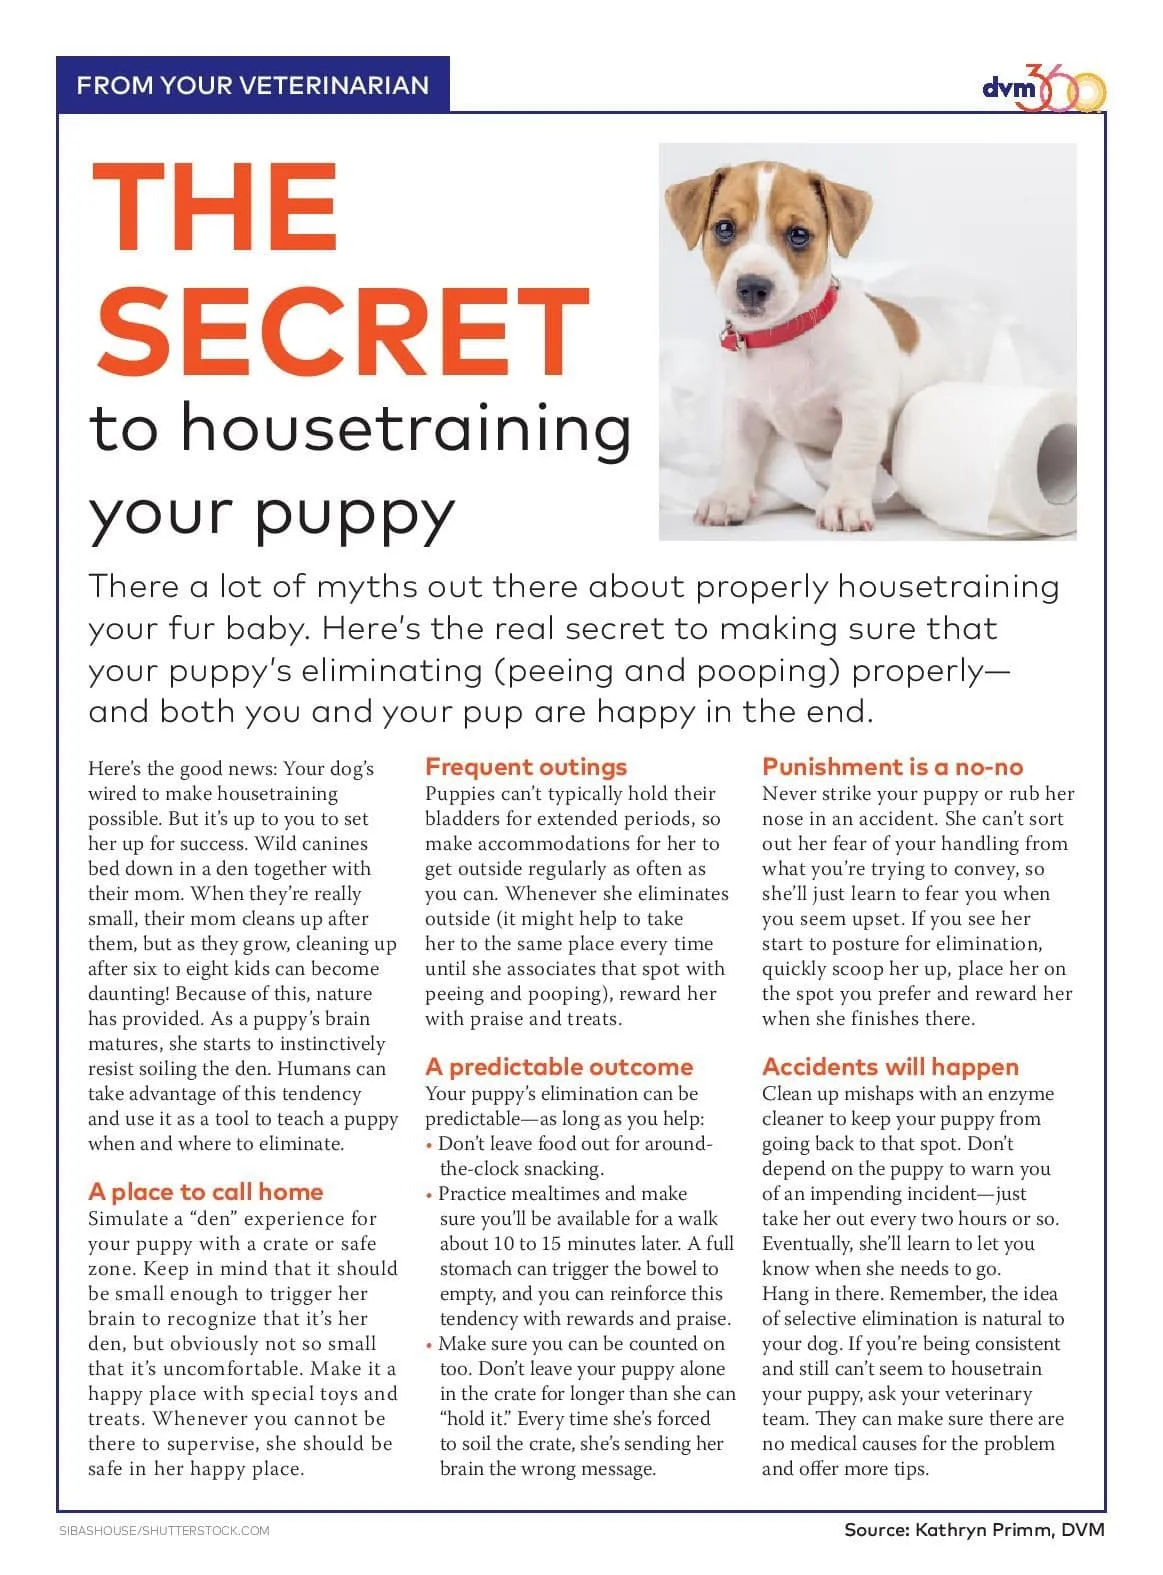 Housetraining Your Puppy